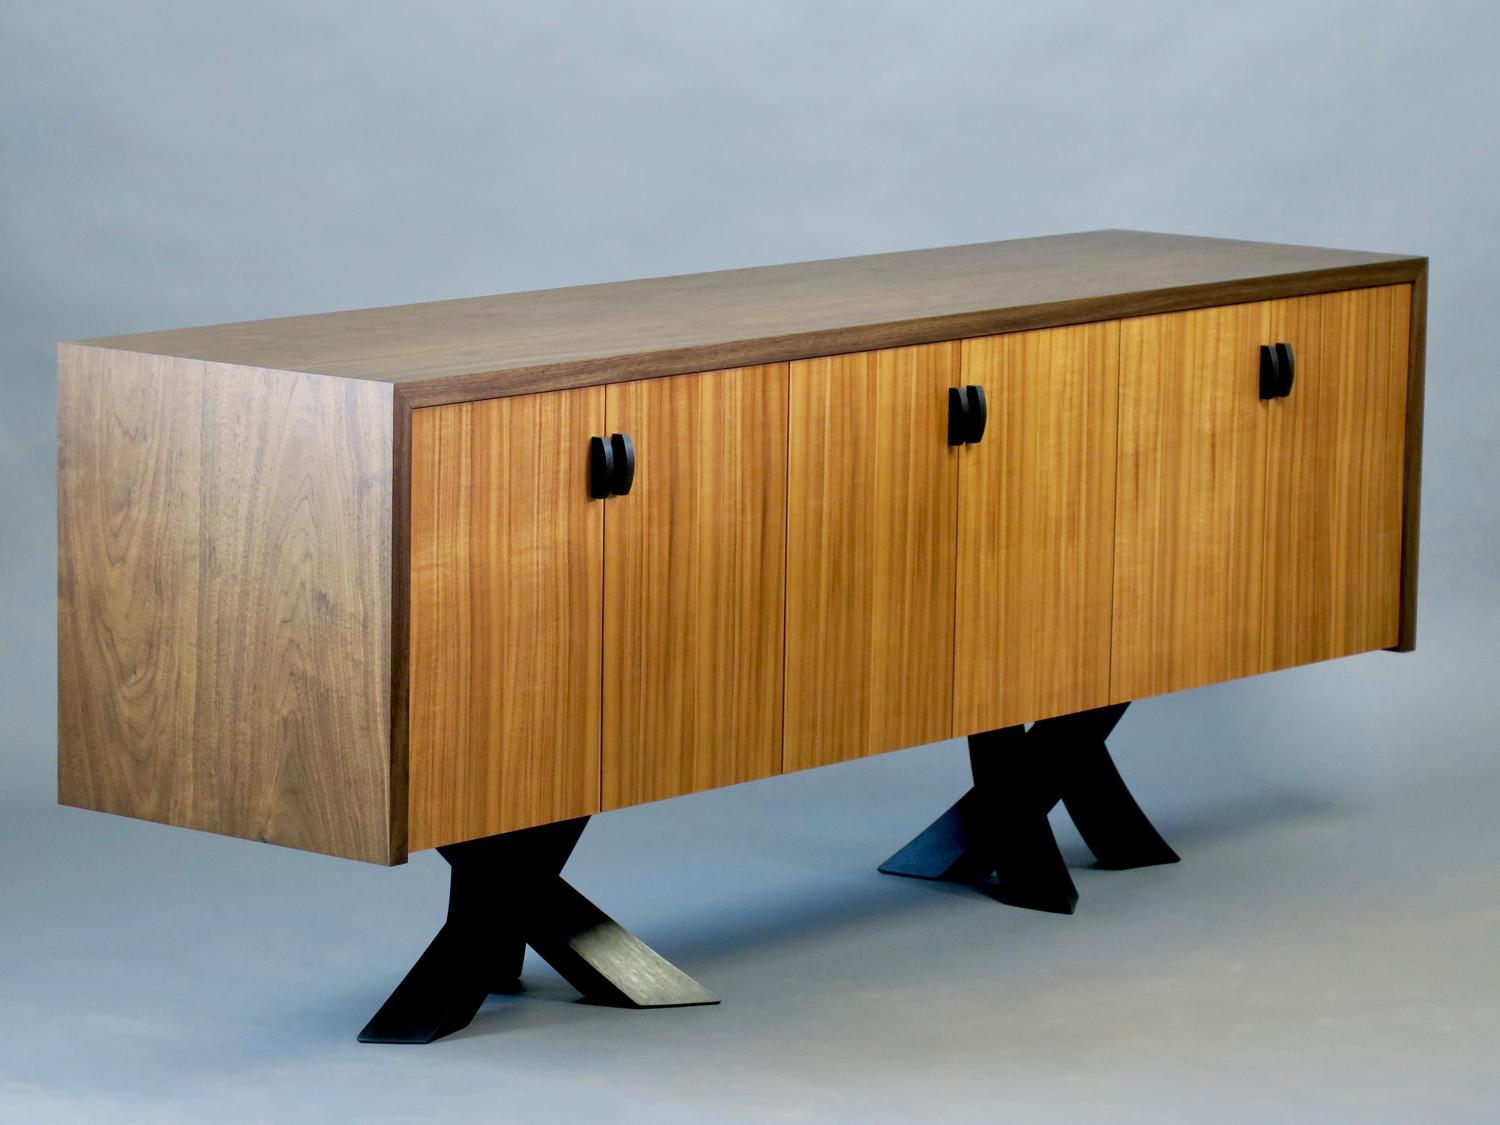 Ebonized Modern Walnut and Koa Credenza with Sculptural Legs by Thomas Throop - In Stock For Sale